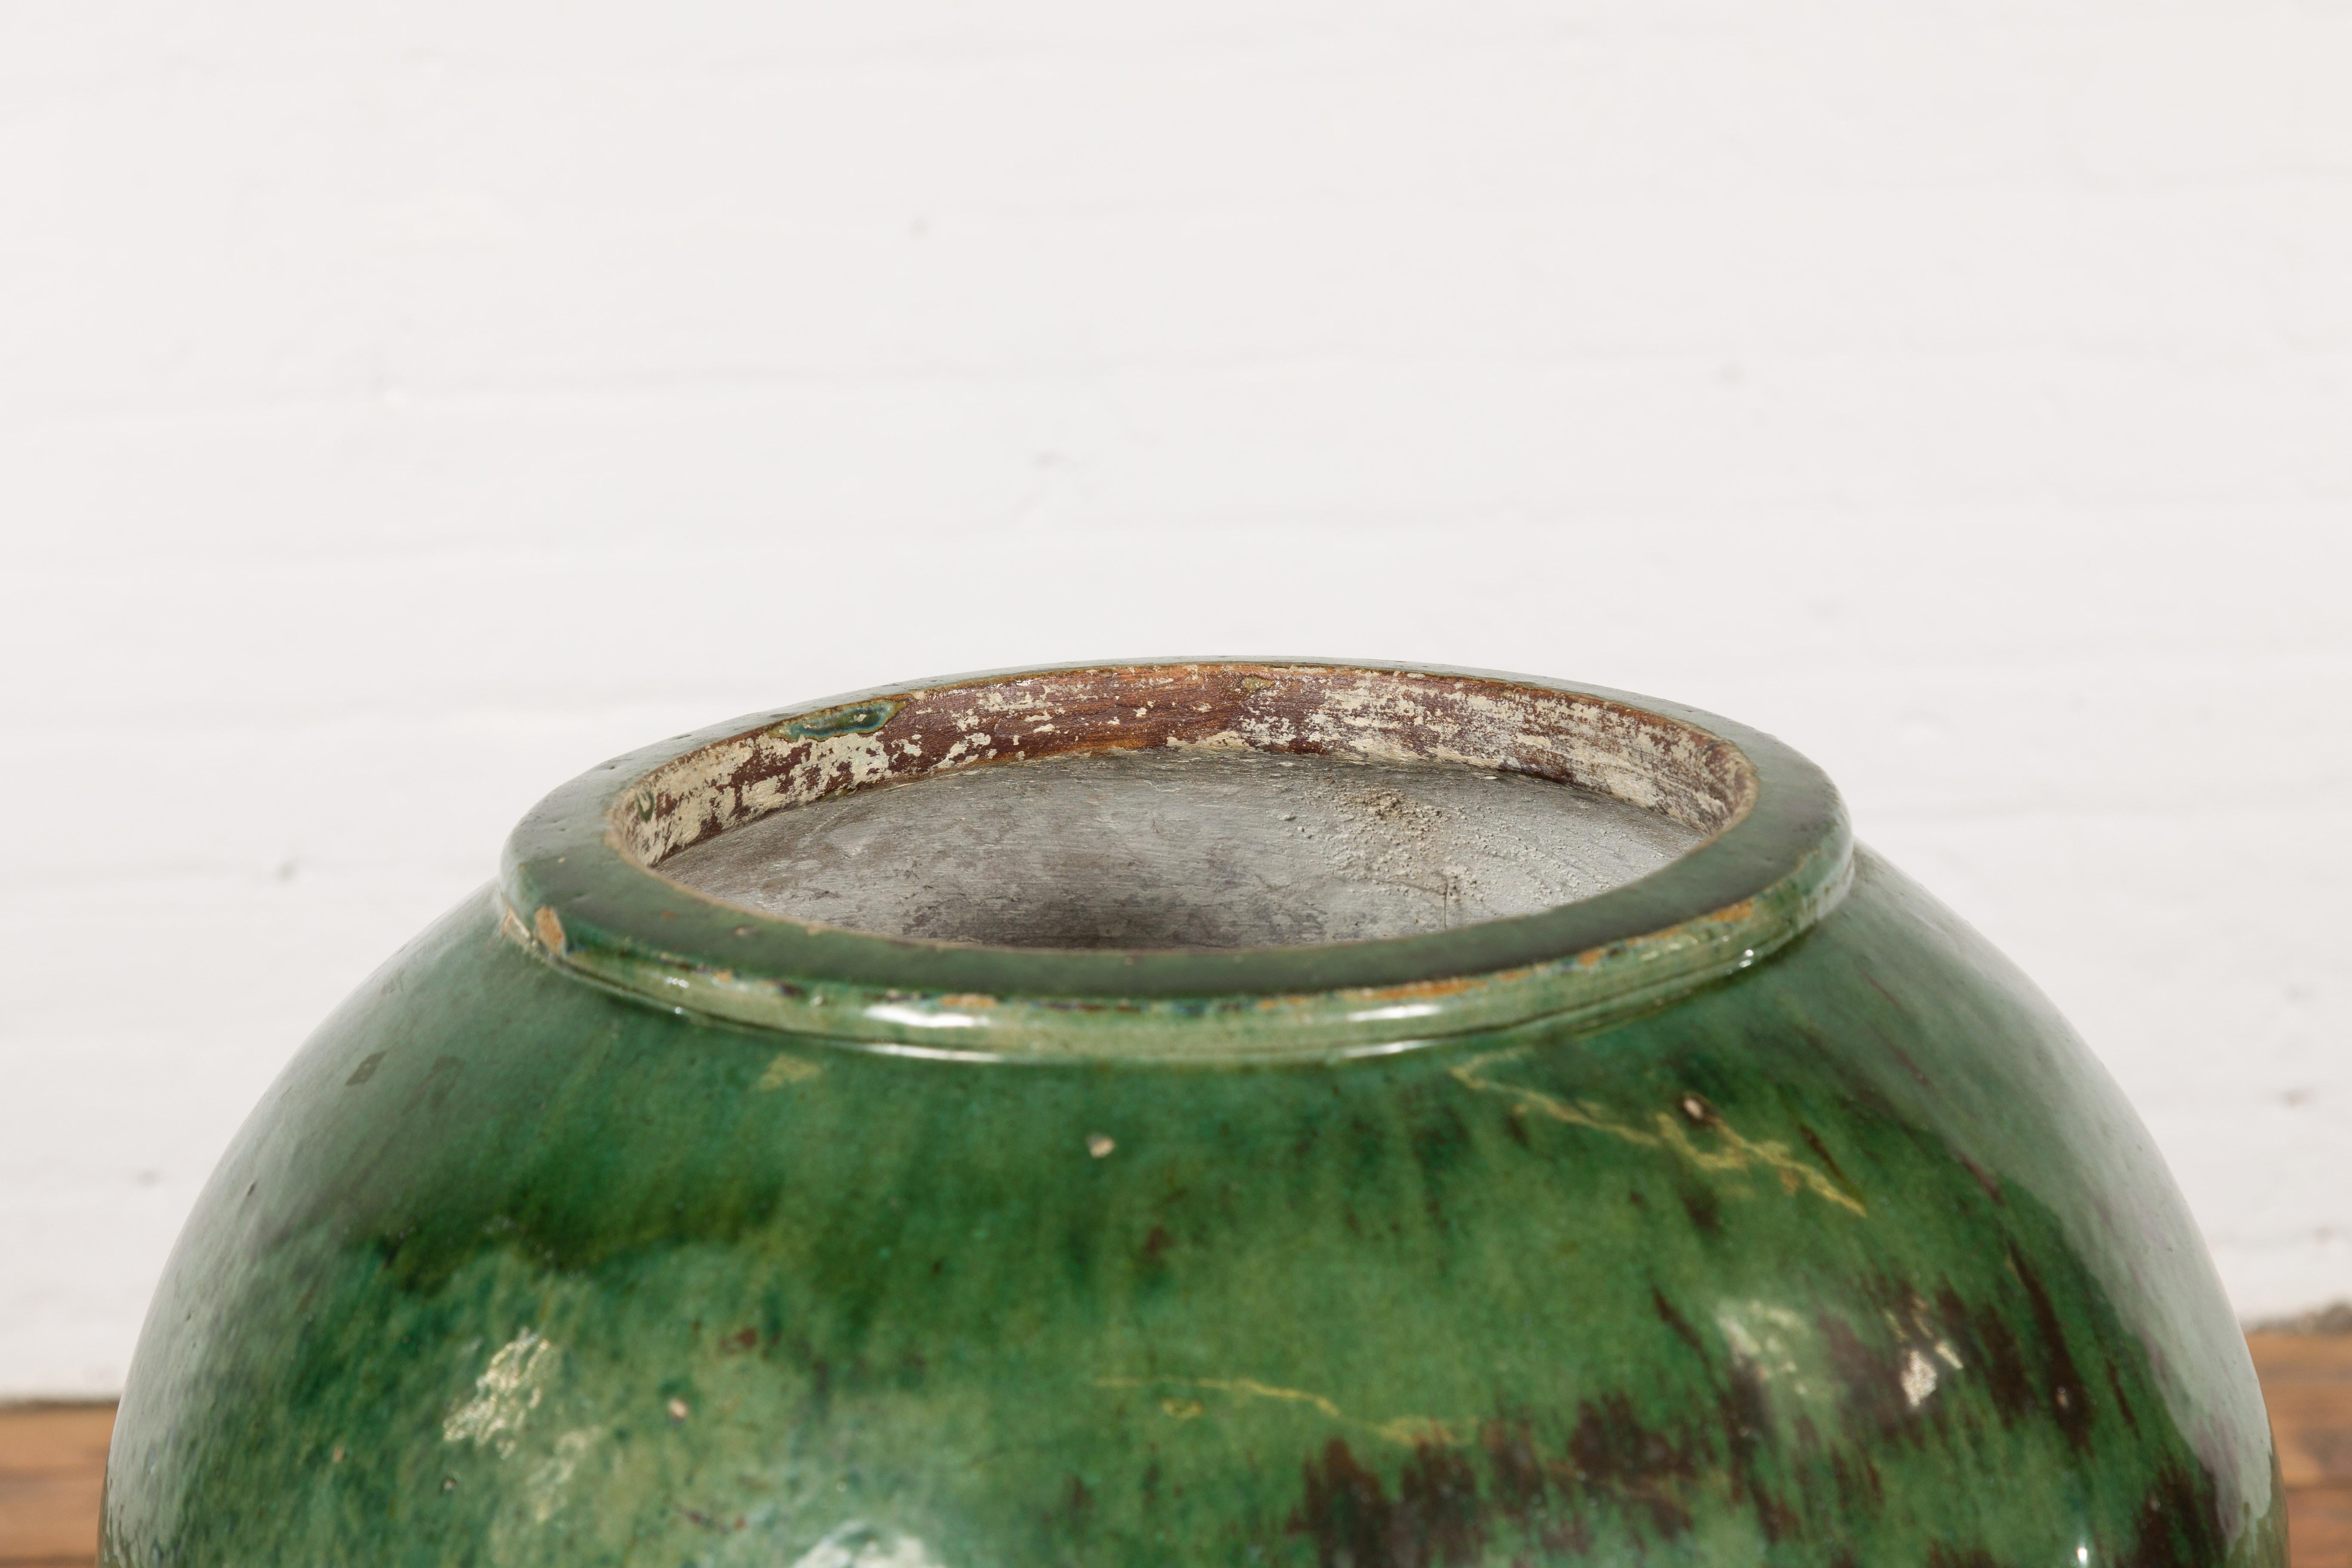 Large Vintage Chinese Vessel Planter with Green Glaze and Brown Accents 1